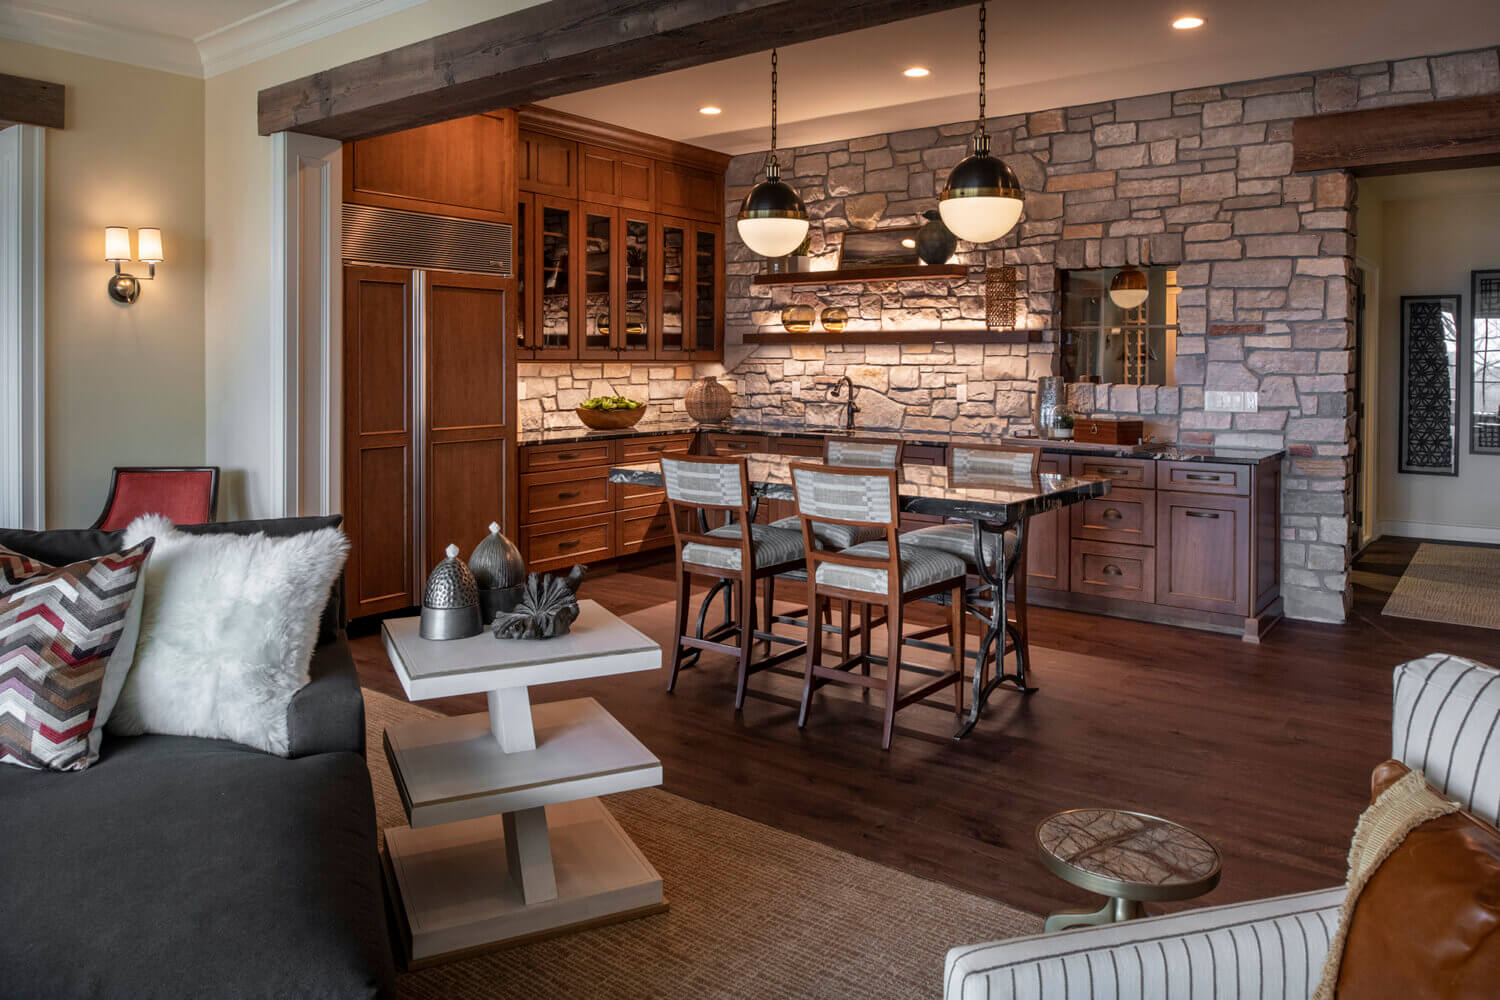 A traditional and rustic home bar and wet bar area with warm stained cherry cabinets and a stone accent wall.